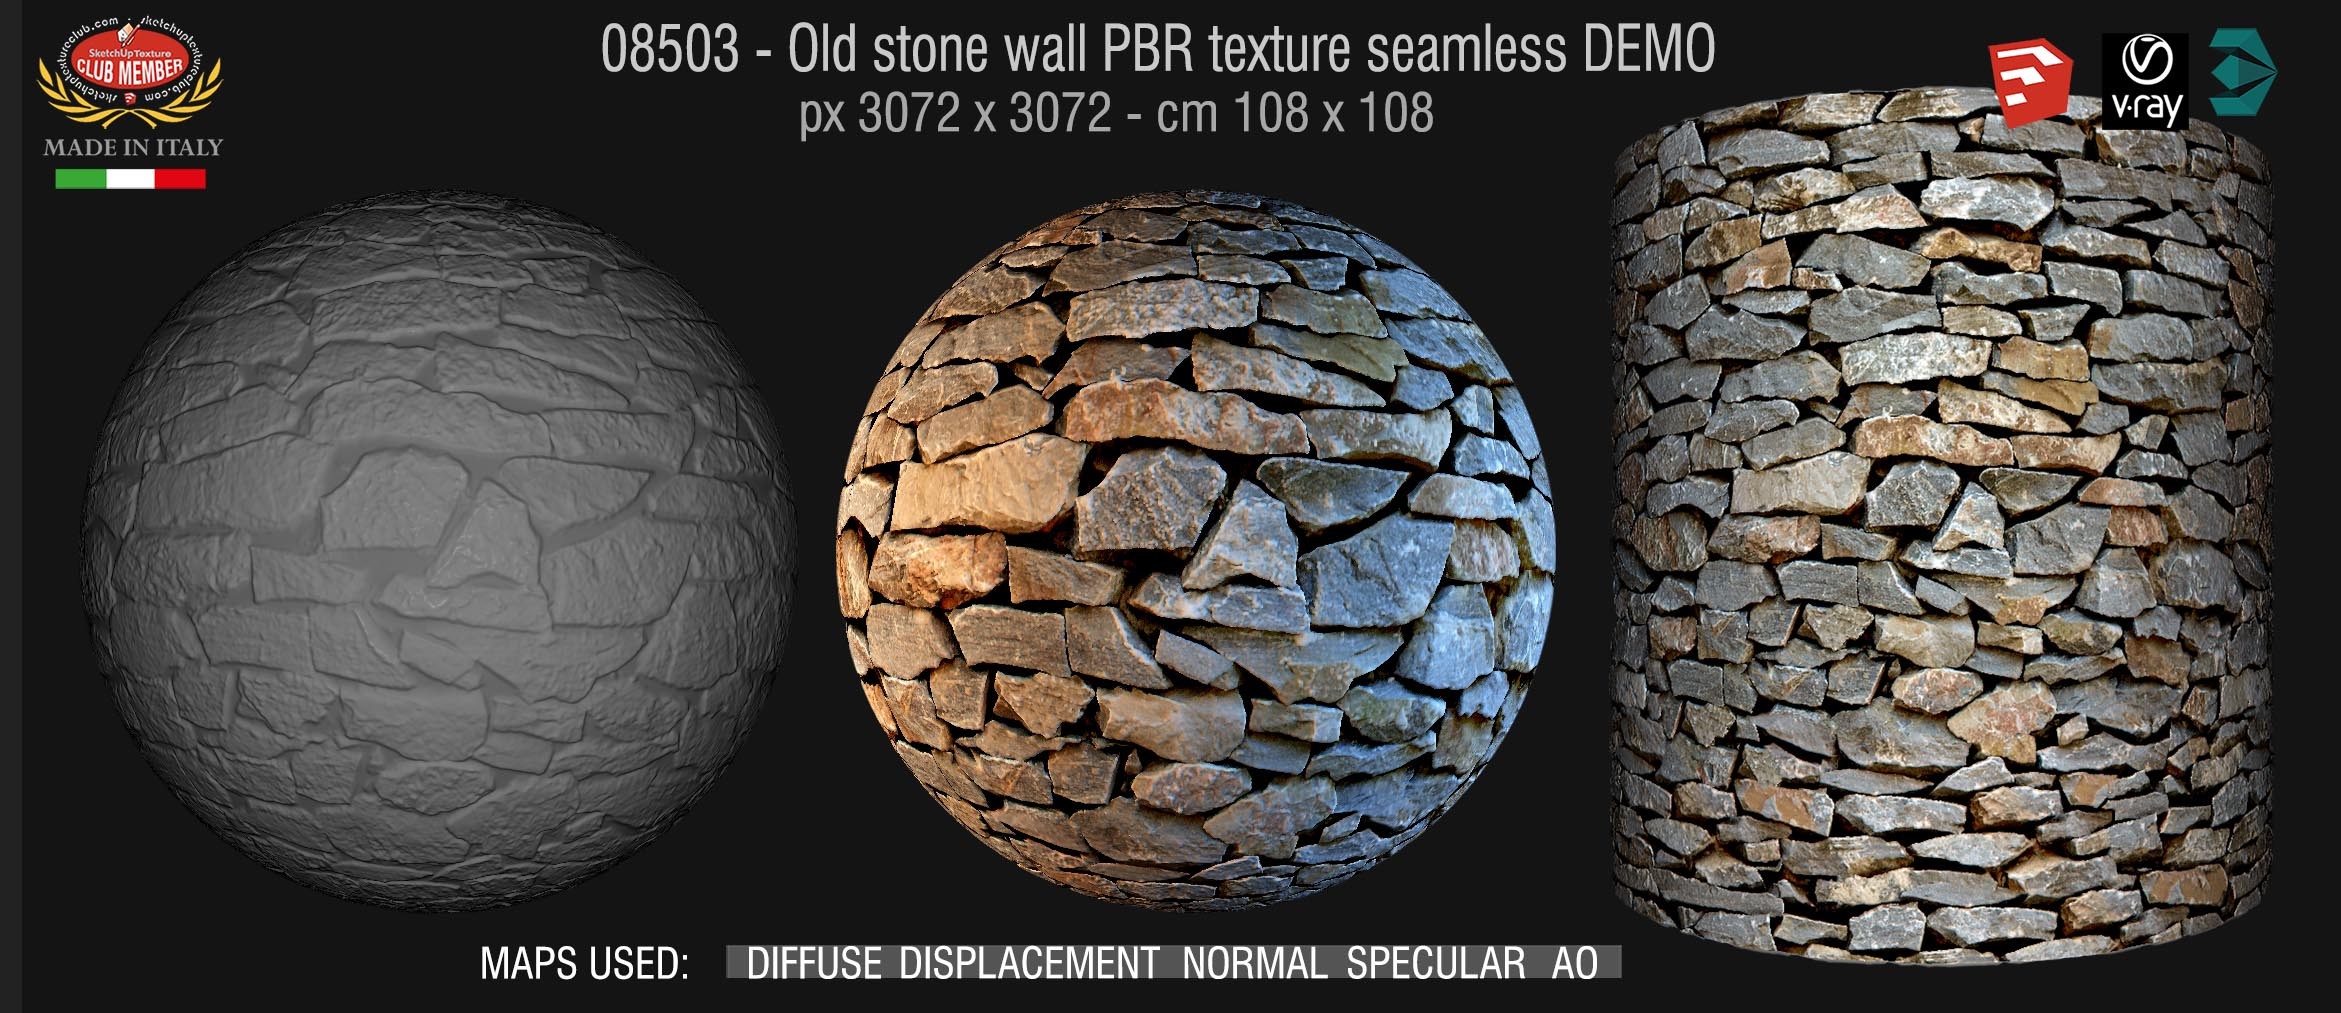 08503 Old stone wall PBR texture seamless DEMO